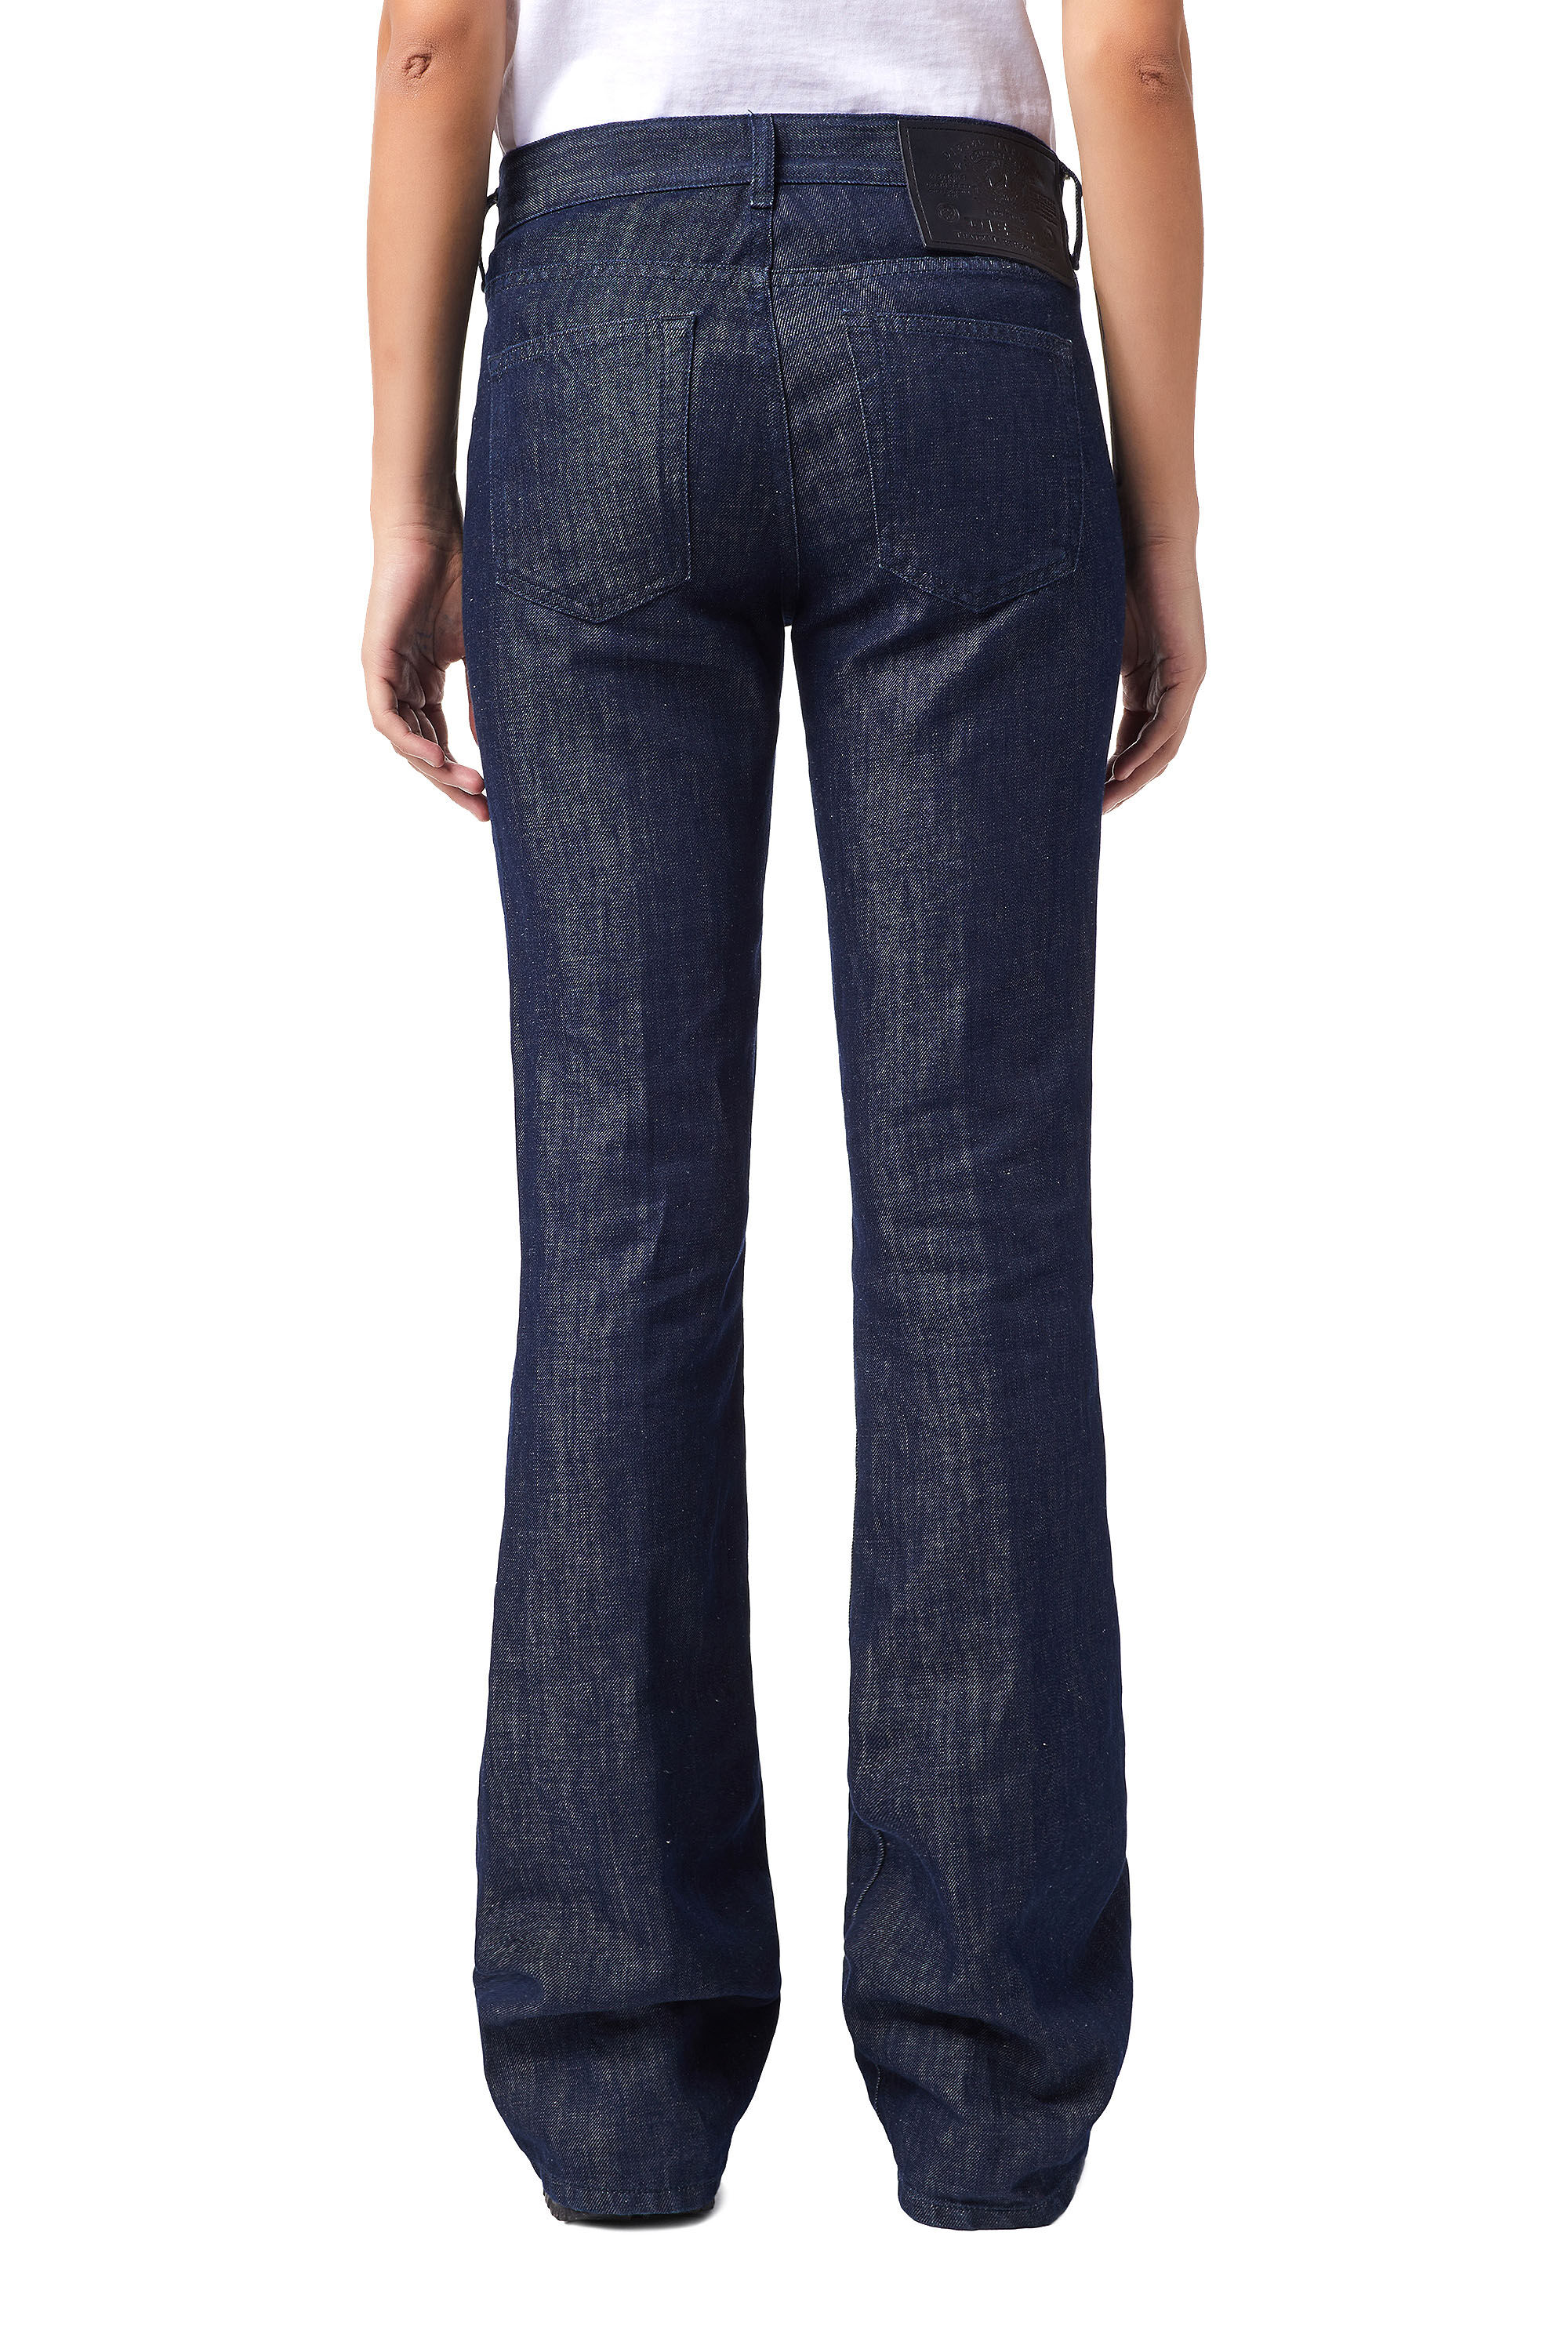 Diesel - 1969 D-EBBEY Z9B15 Bootcut and Flare Jeans,  - Image 5